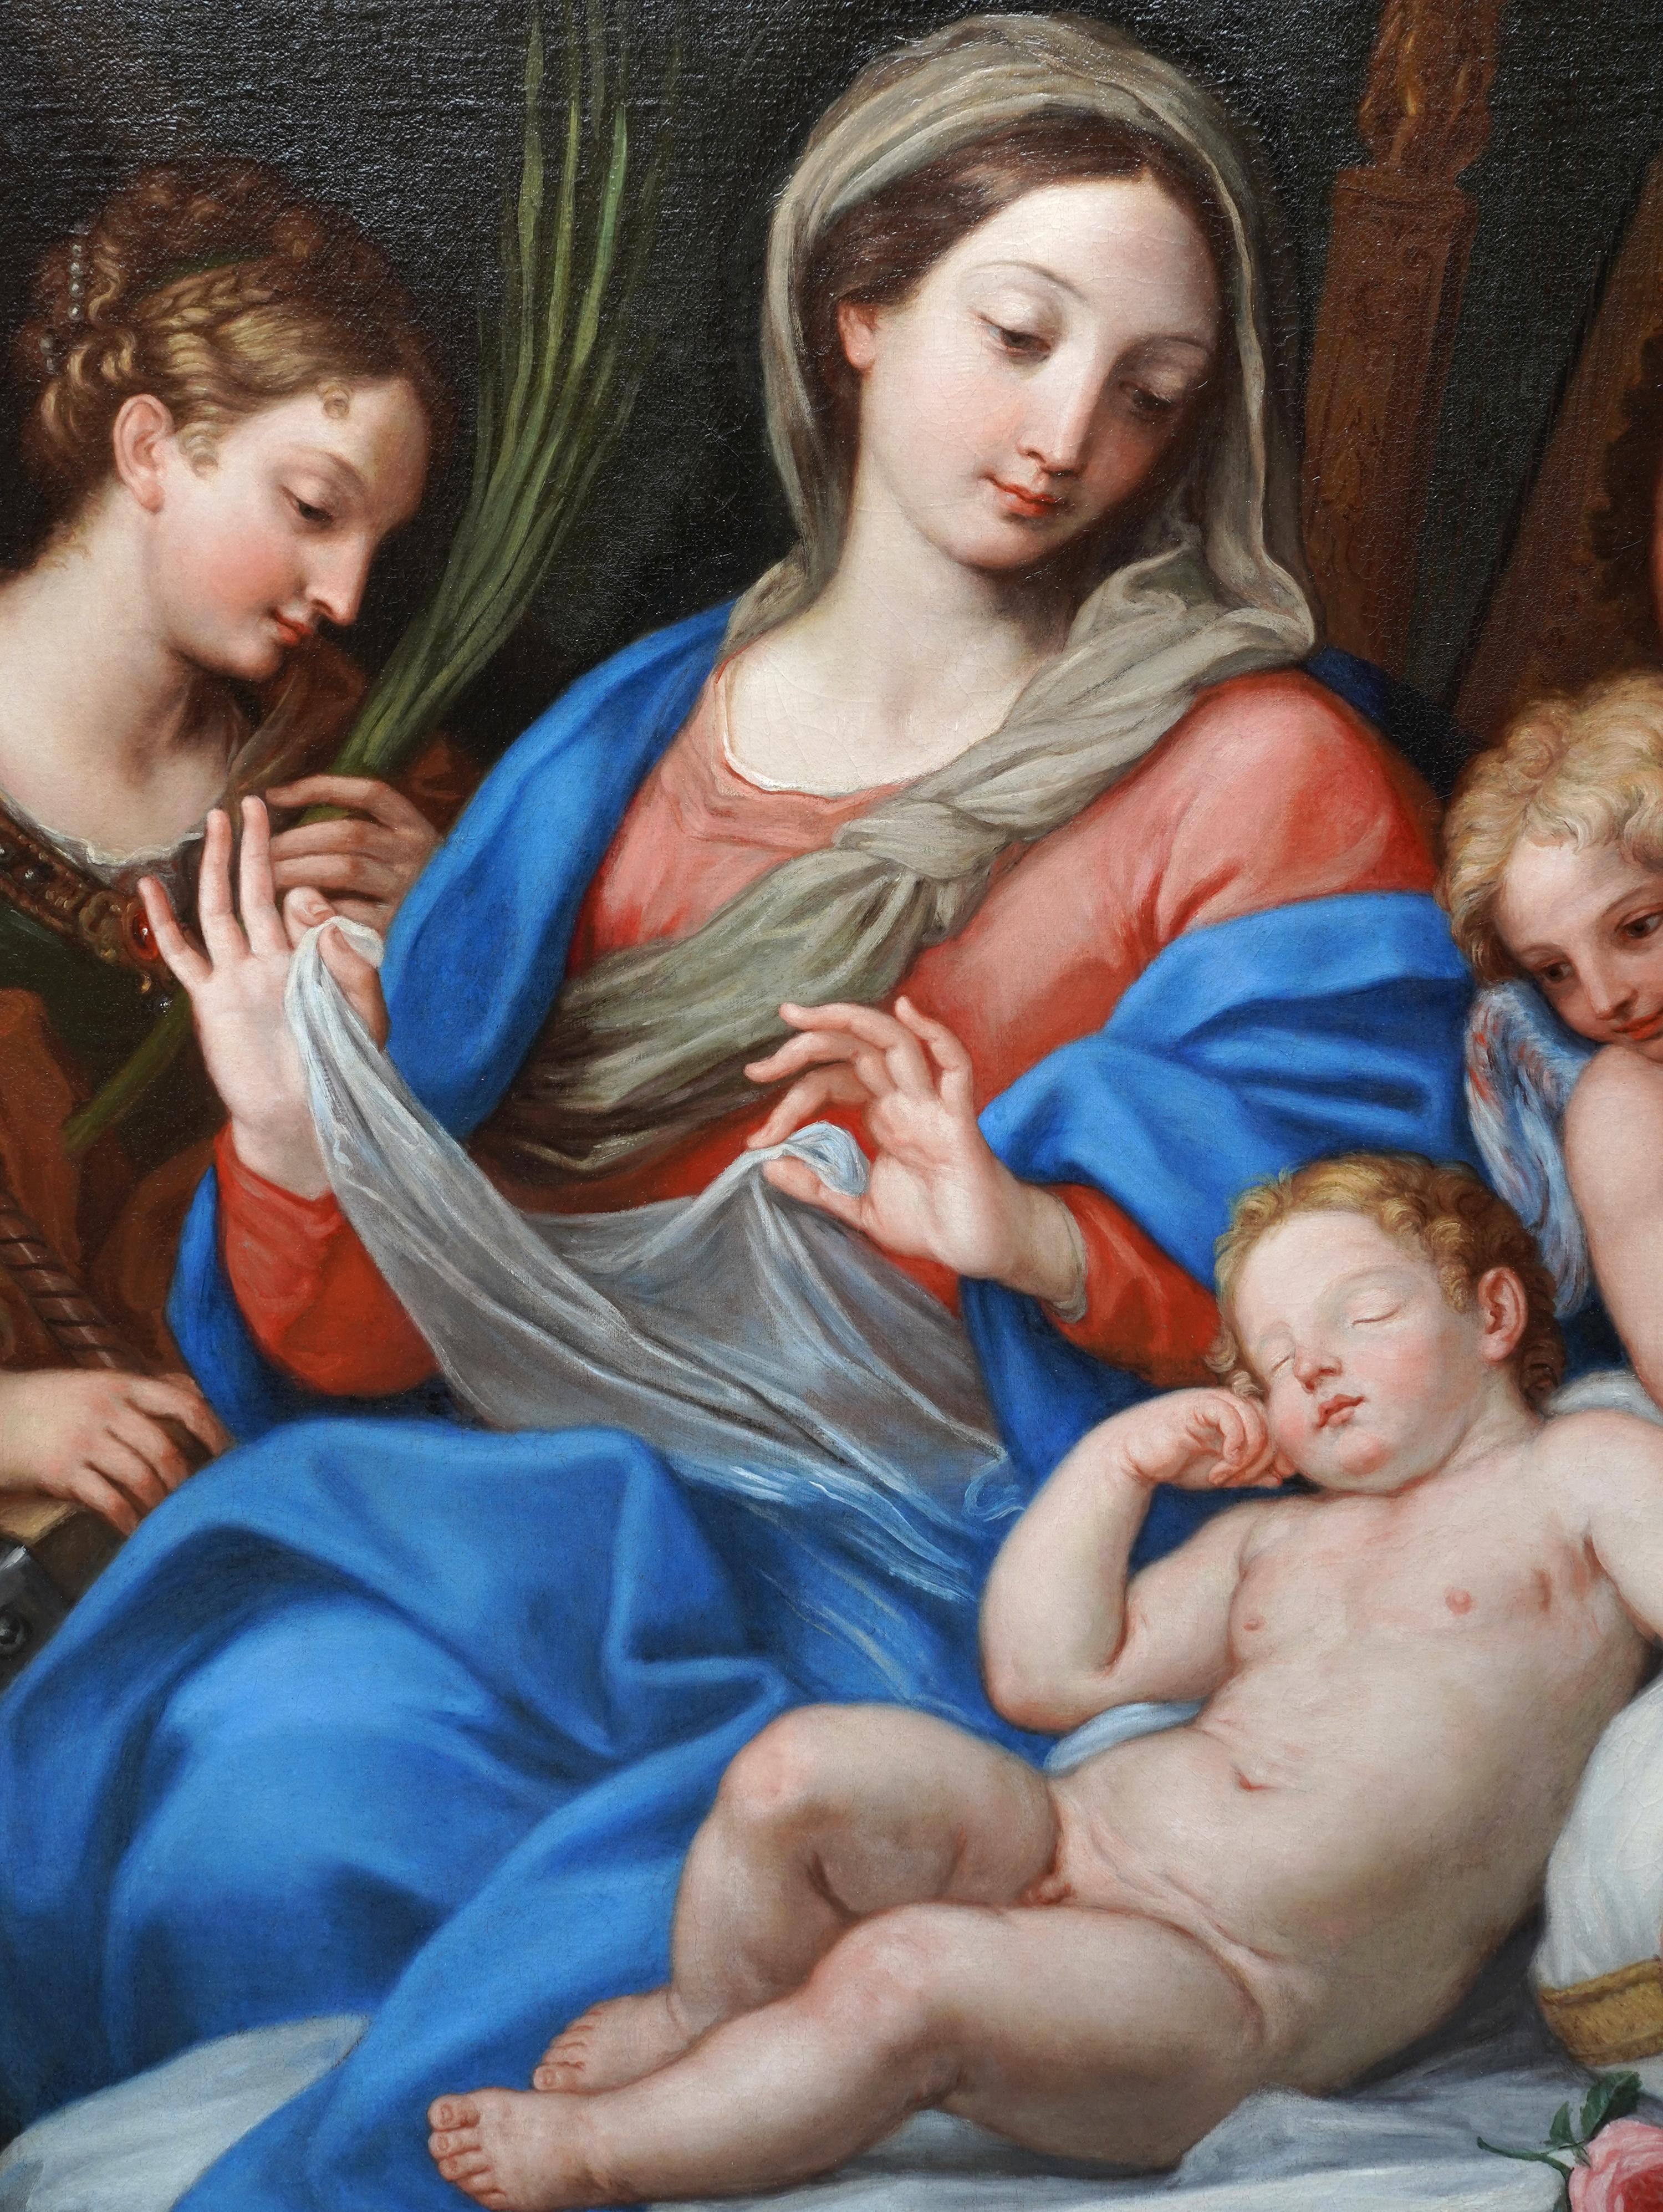 This stunning Italian 17th century Old Master religious oil painting is by Baroque artist Giuseppe Bartolomeo Chari. Painted circa 1684 it is a large and vibrant oil painting of the Madonna and child. To their left is Saint Catherine and to their